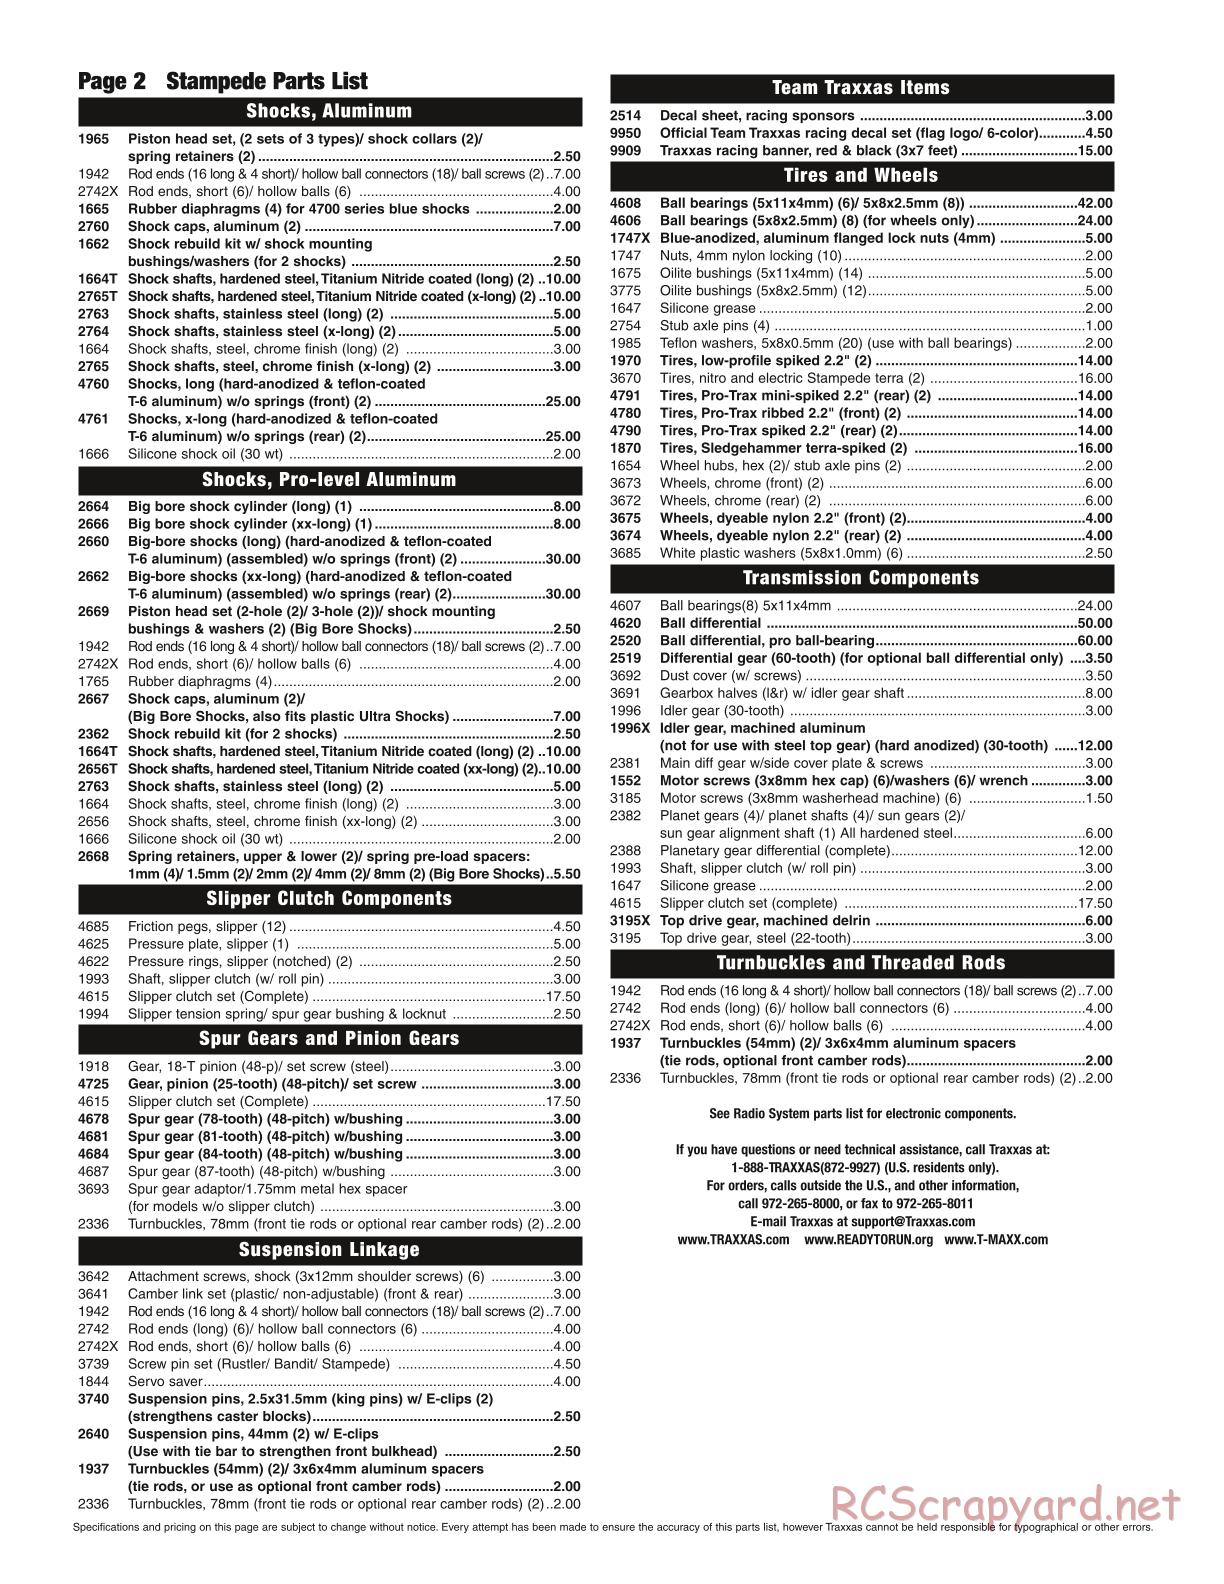 Traxxas - Stampede XL-1 - Parts List - Page 2